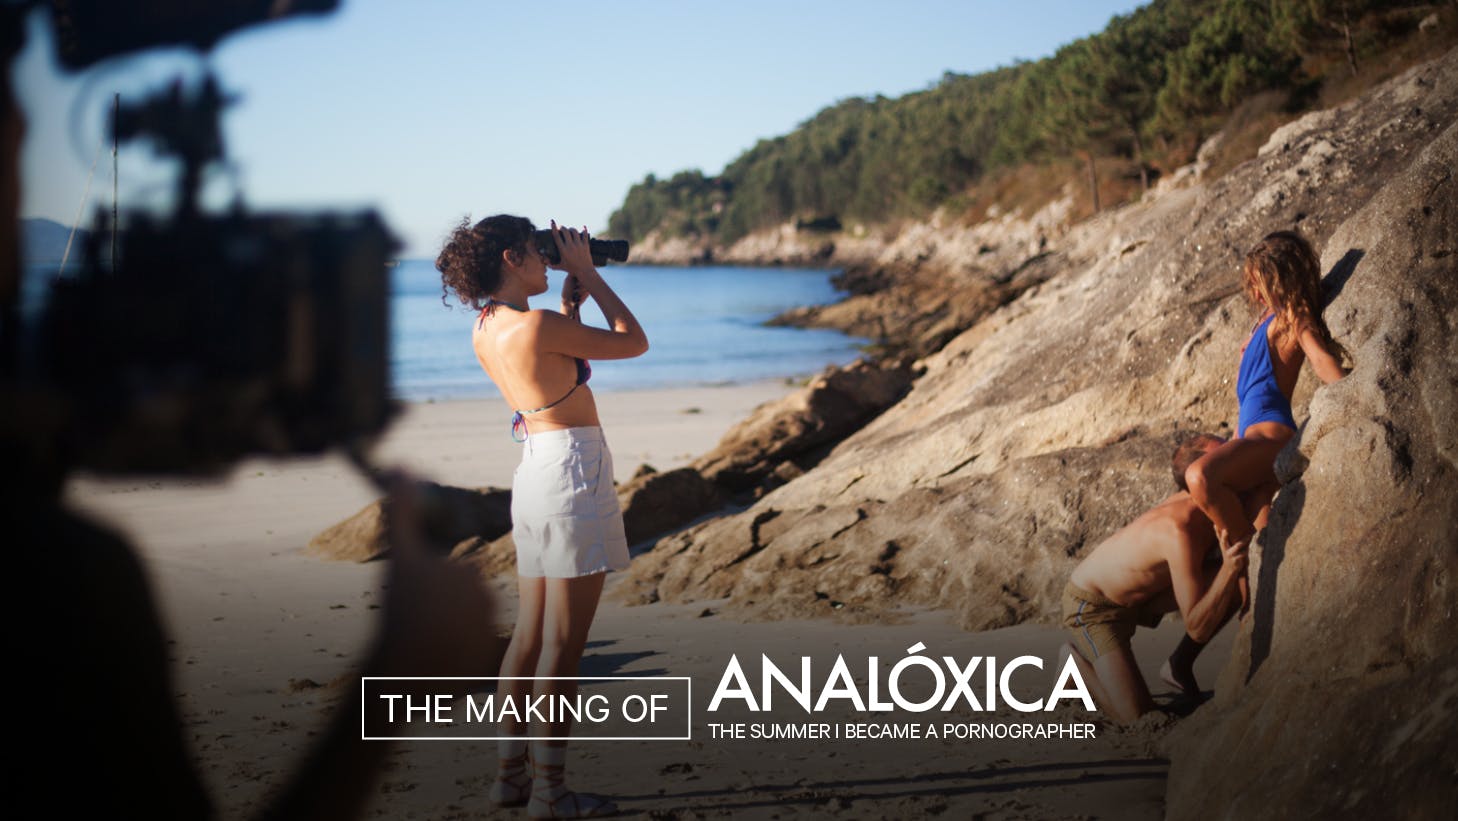 Behind The Scenes: ANALÓXICA - The Summer I Became a Pornographer